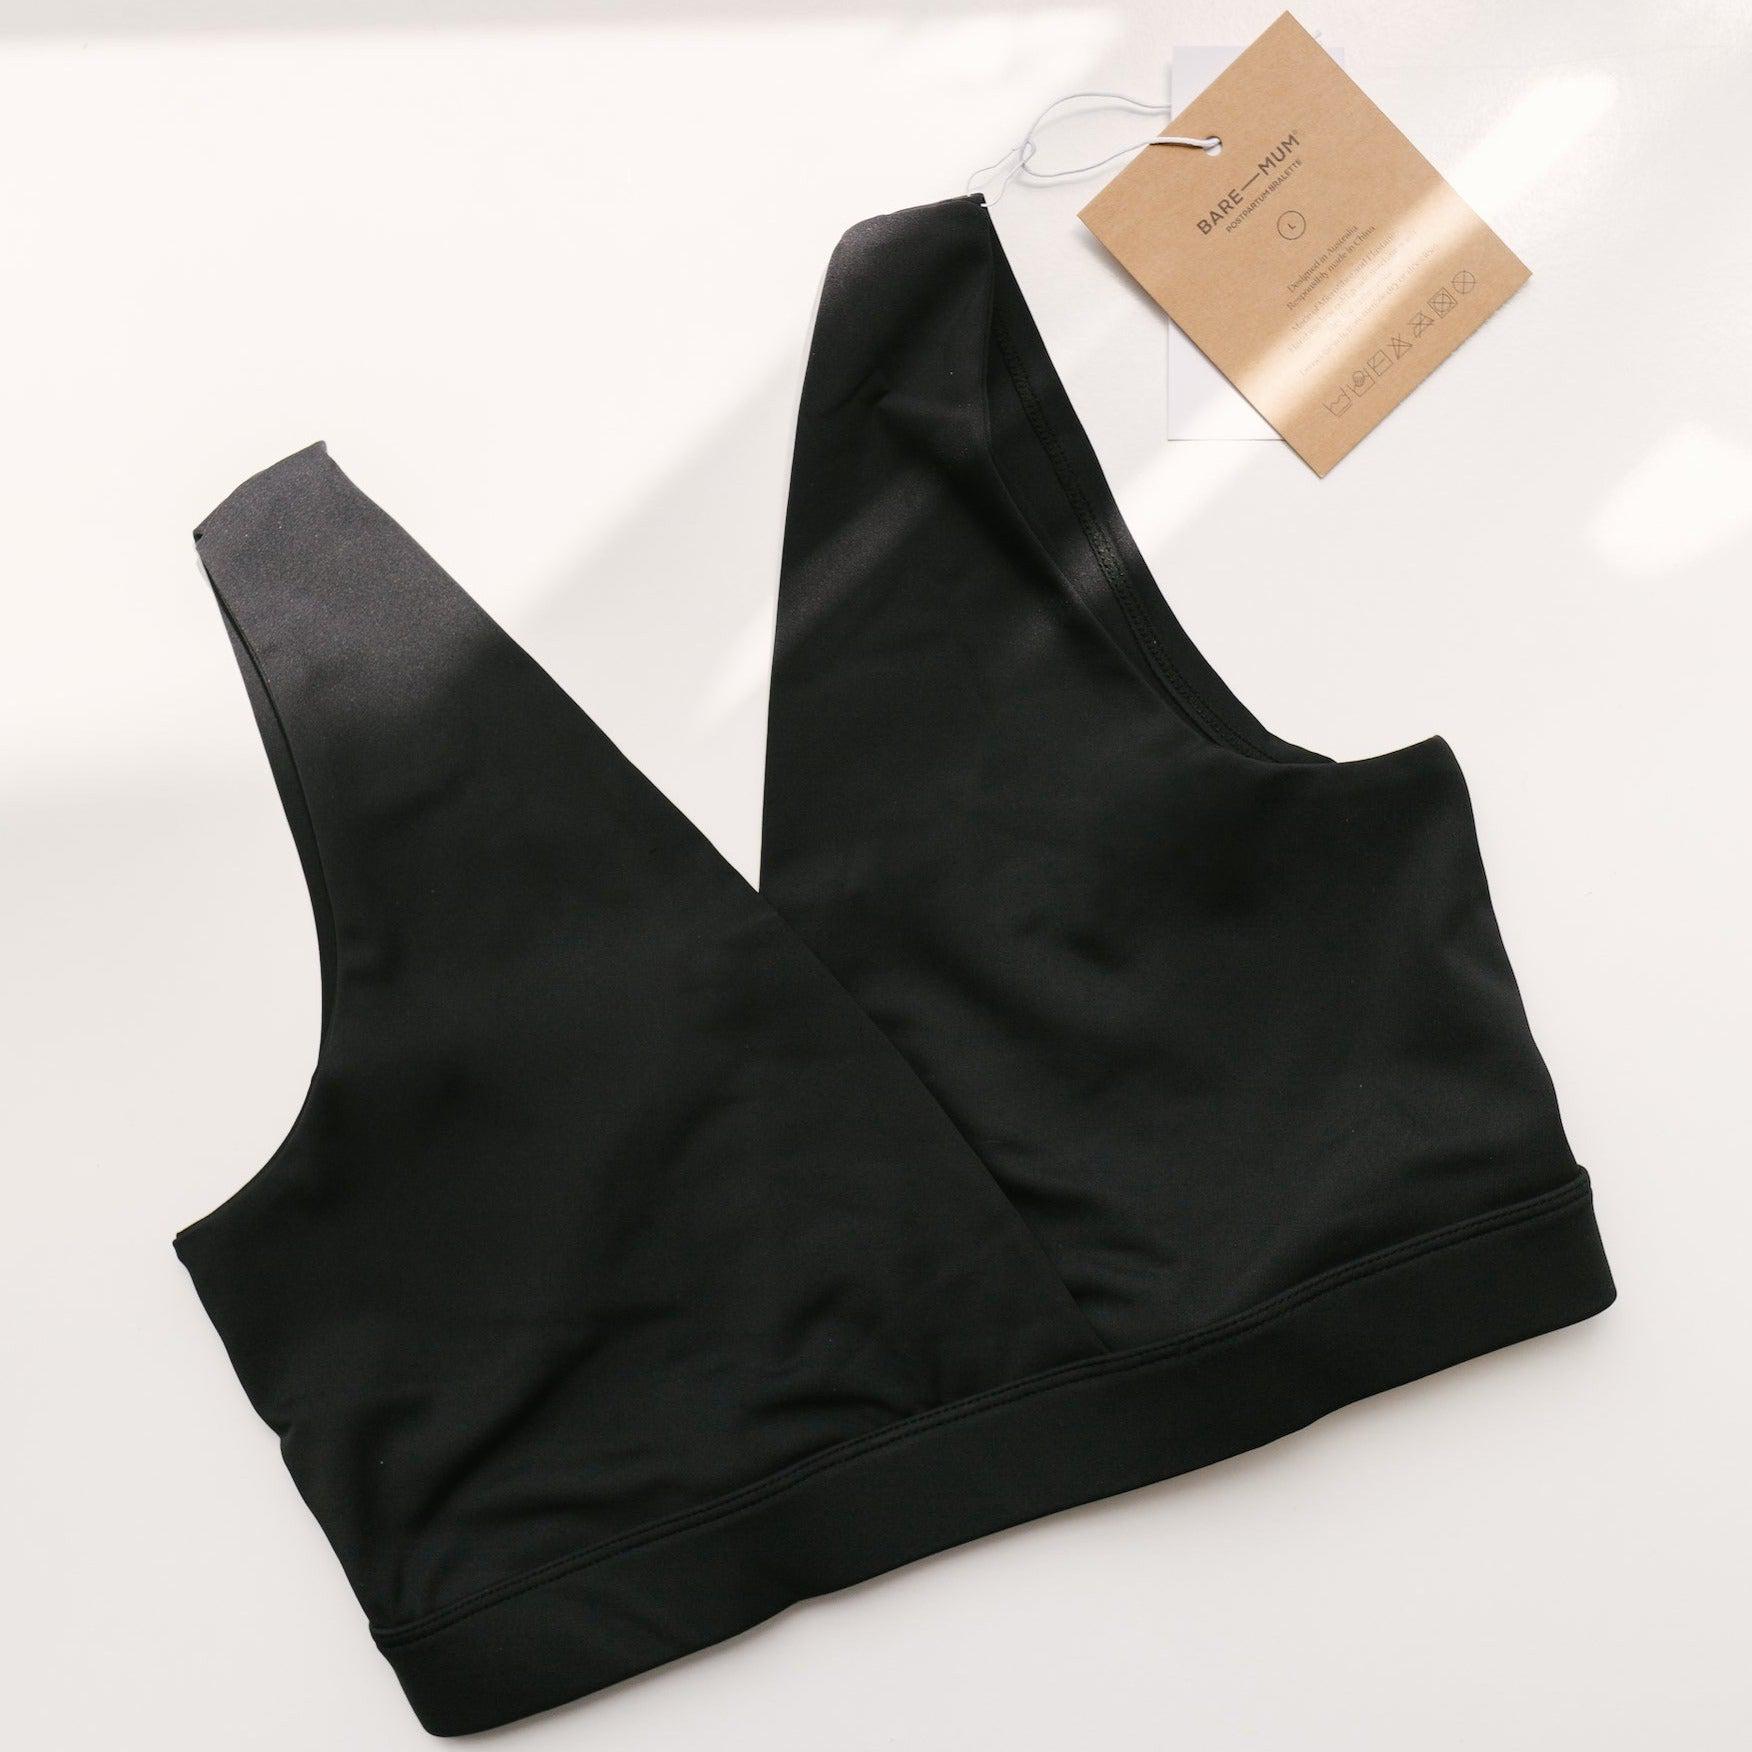 A black sports bra from Bare Mum with The Bare Essentials Kit tag, perfect for breastfeeding mothers in need of recovery support.